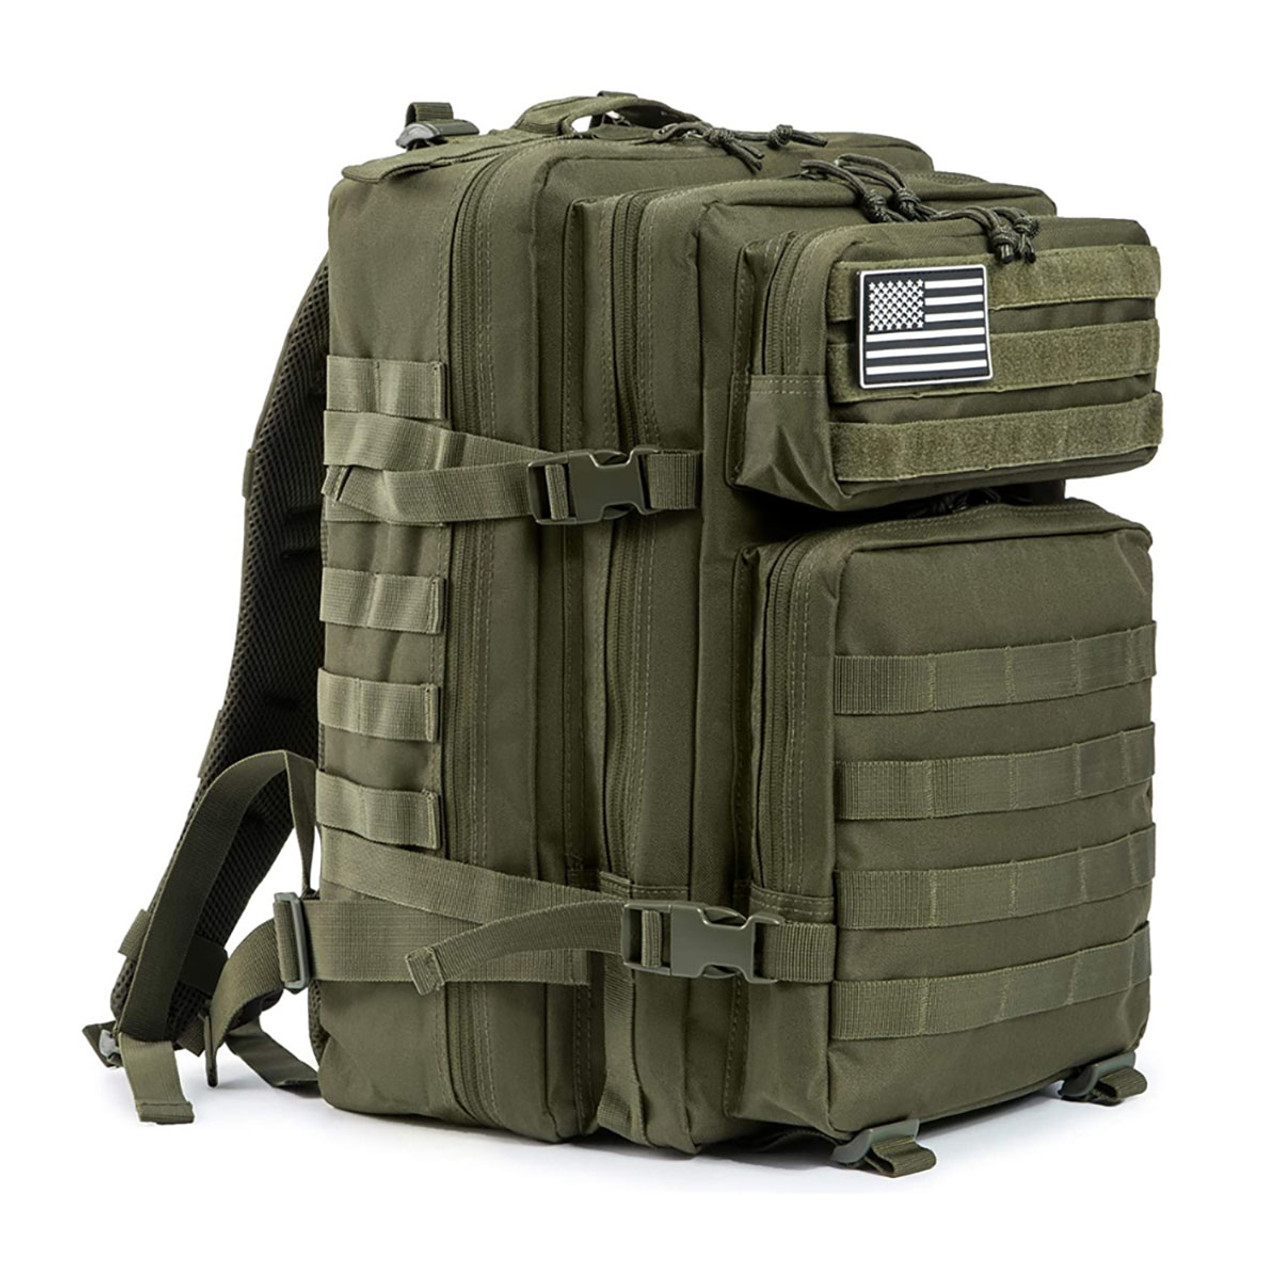 Tactical Military 45L Molle Rucksack Backpack product image